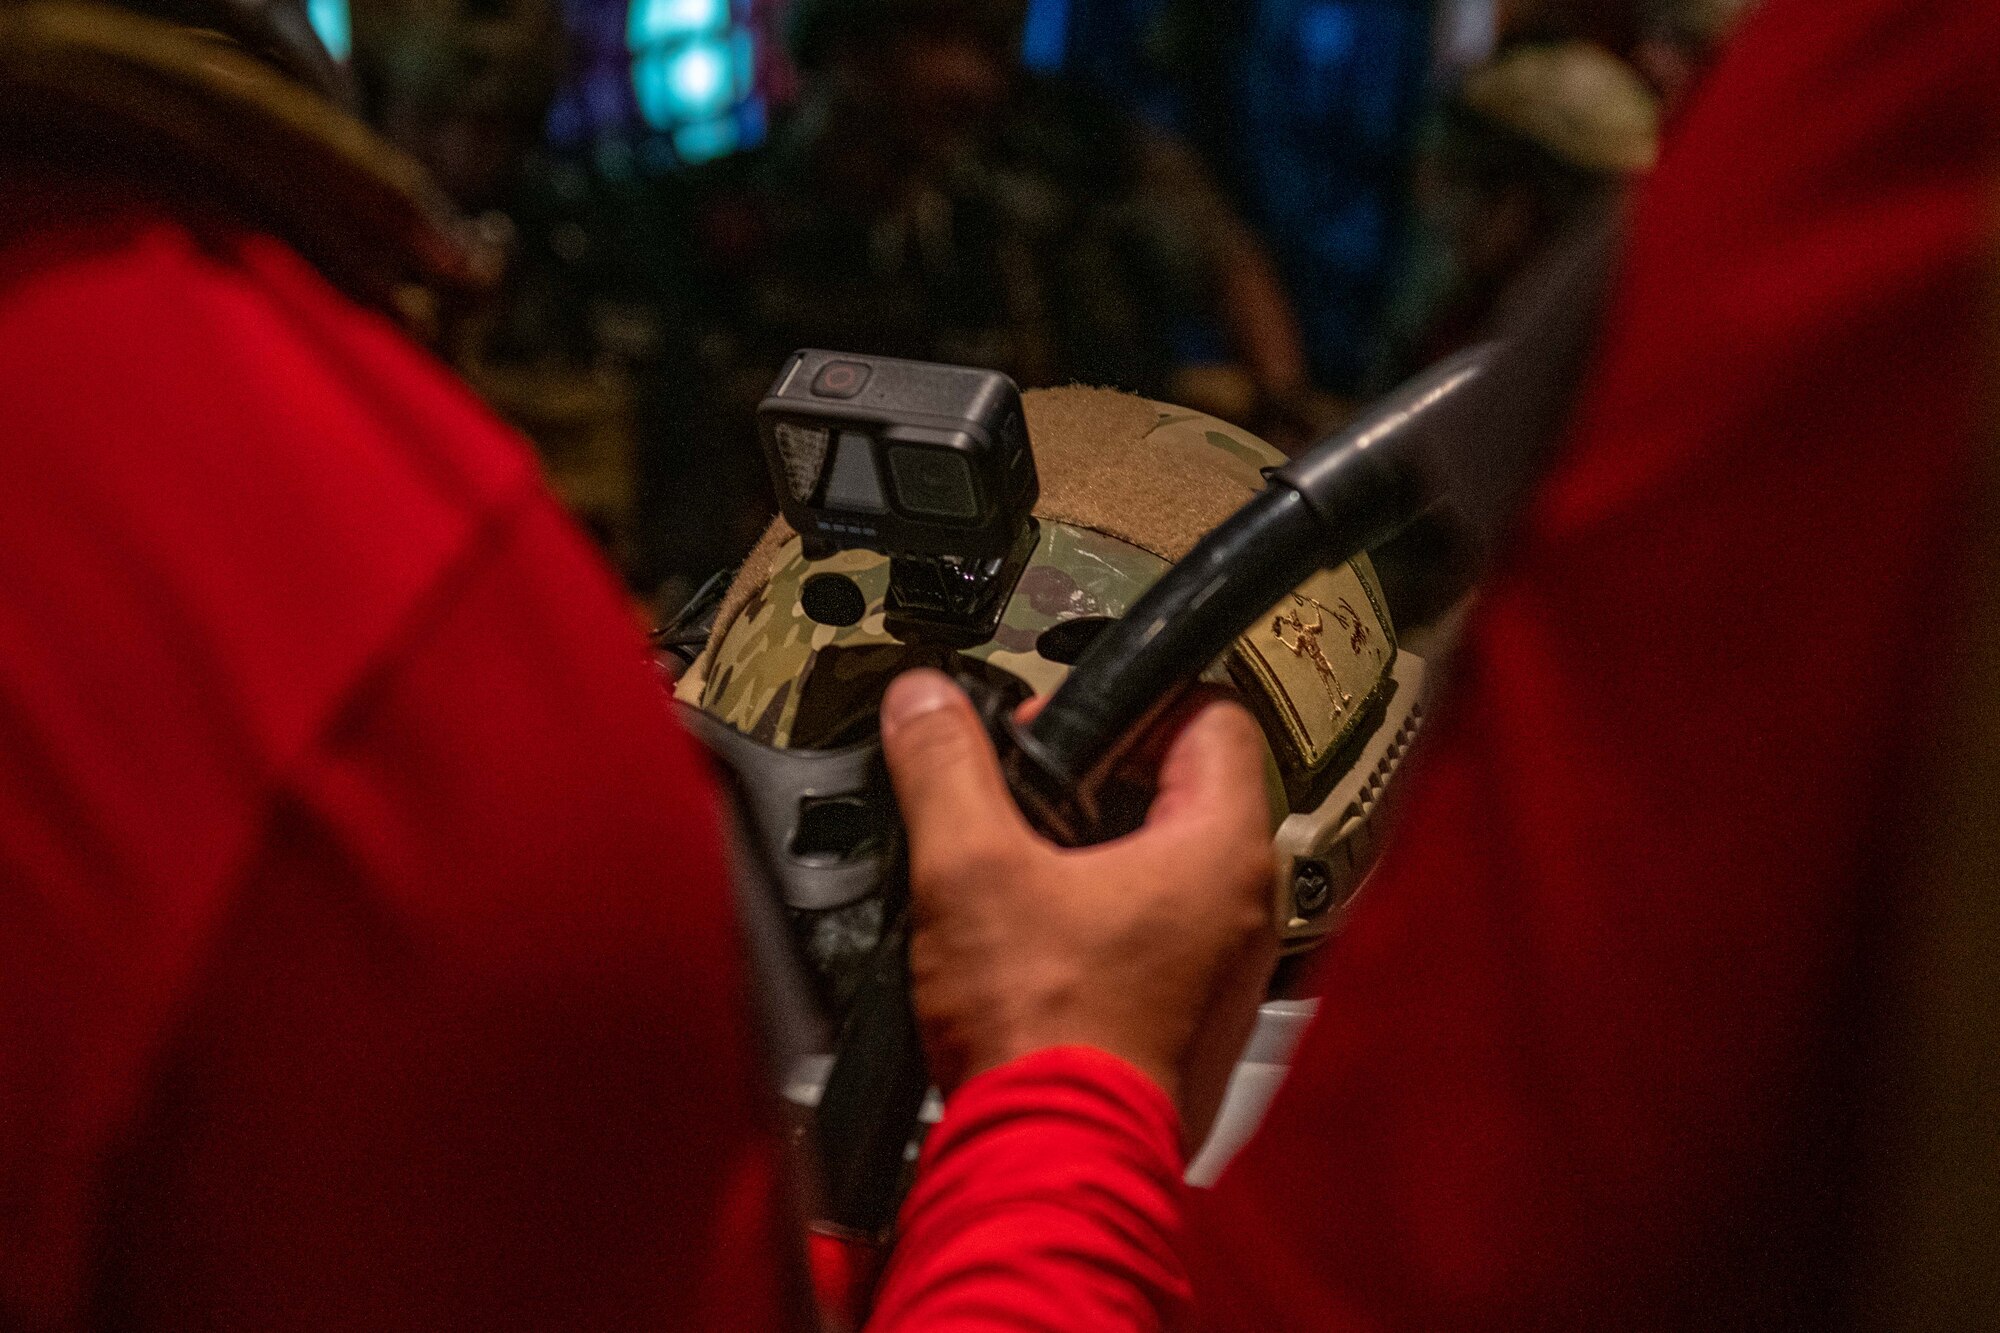 An Airman adjusts his goggles before getting everything on and ready for the jump.